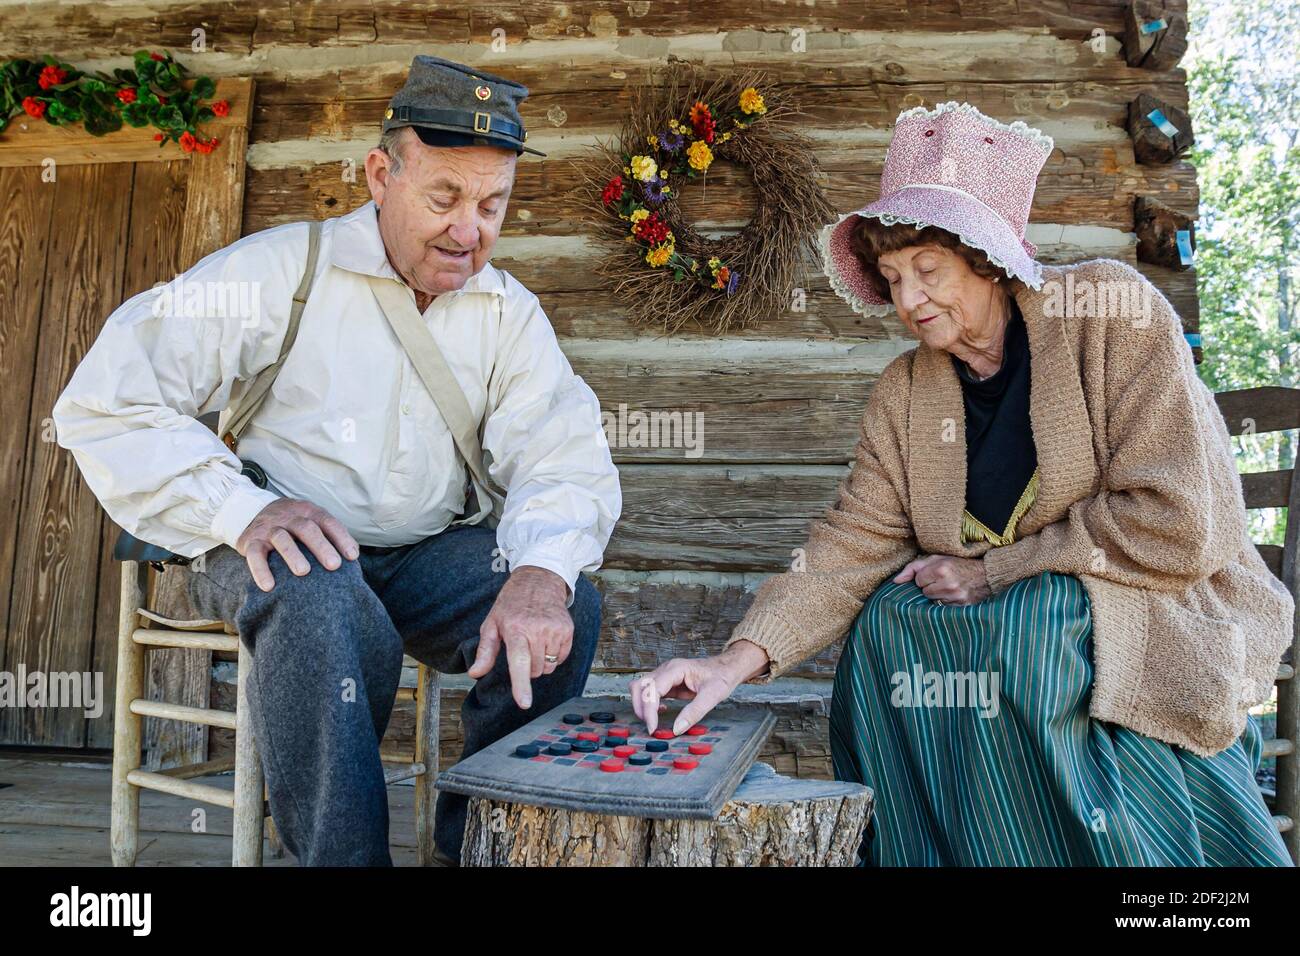 Alabama Leighton LaGrange College Site Park mountain town replica,historic village reenactors guides wearing period costumes,play playing checkers, Stock Photo